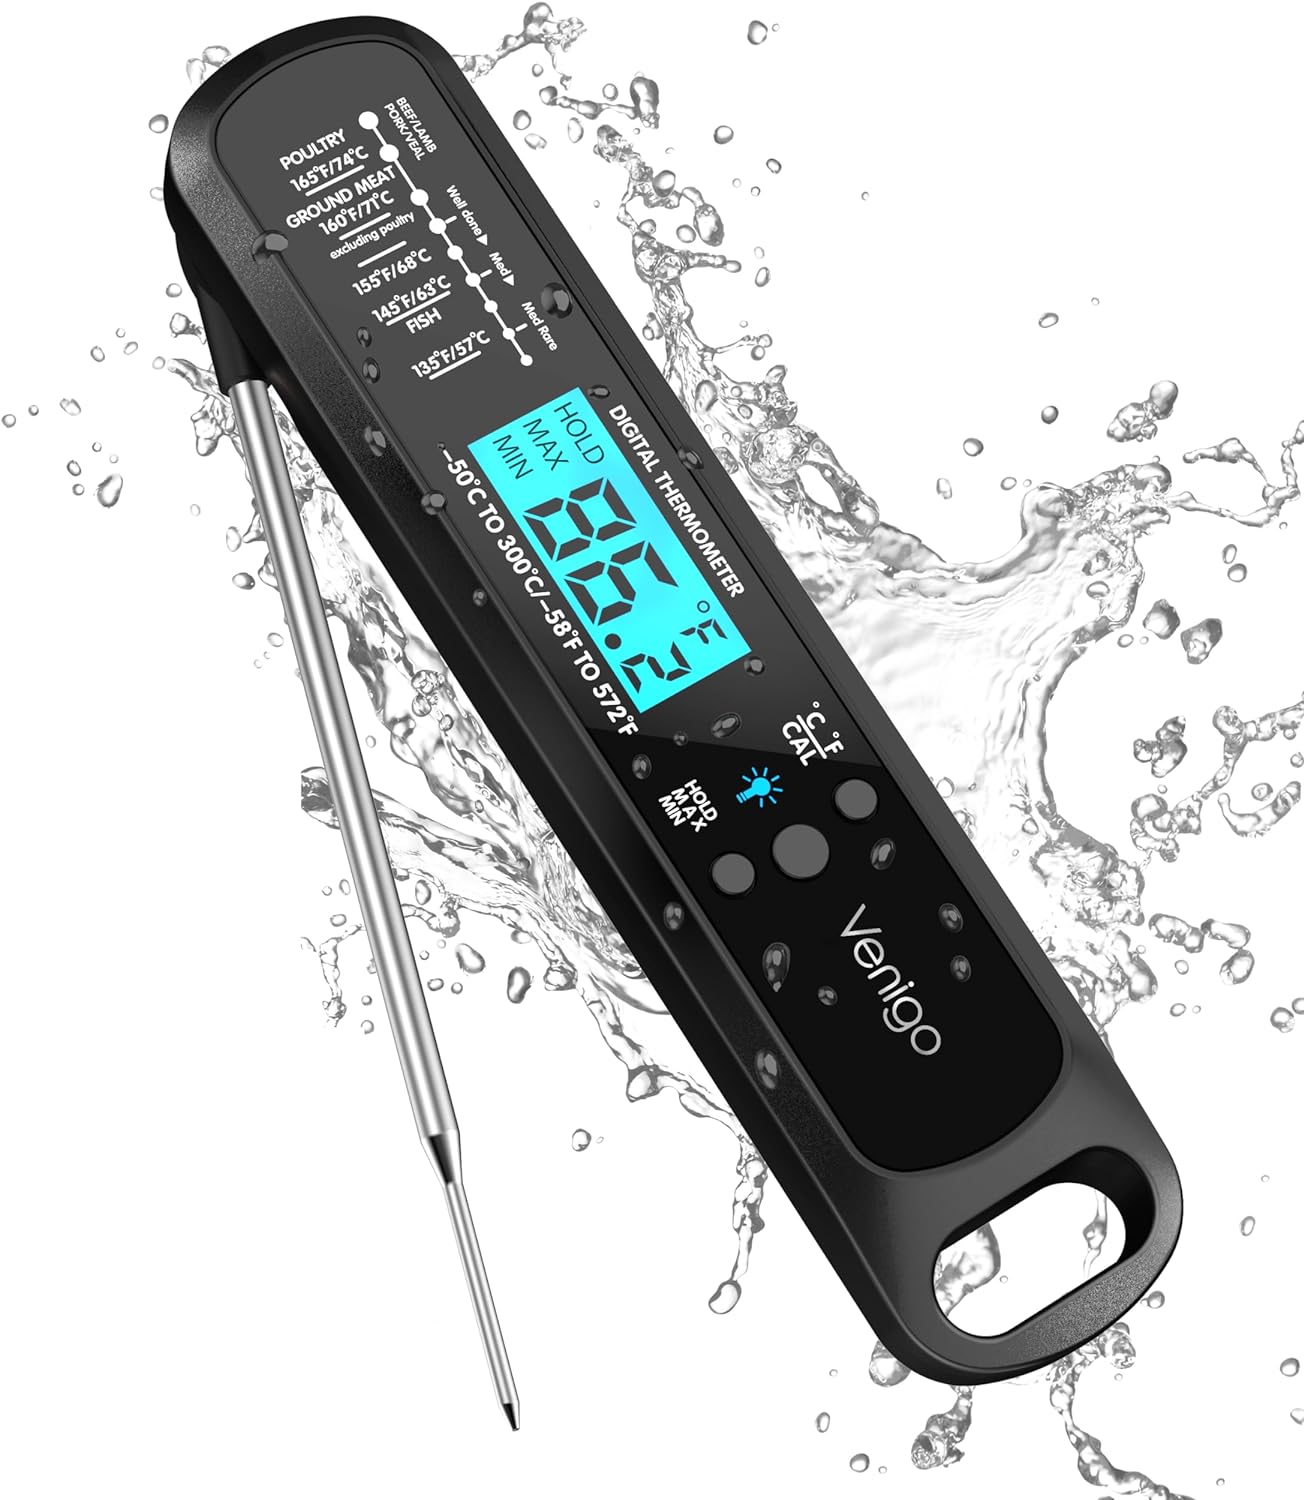 Venigo Digital Meat and Food Thermometer for Cooking and Grilling, Waterproof Instant-Read Cooking Thermometer, Kitchen Probe Thermometer for Baking, Roasting, Smoking, Deep Frying (Black)